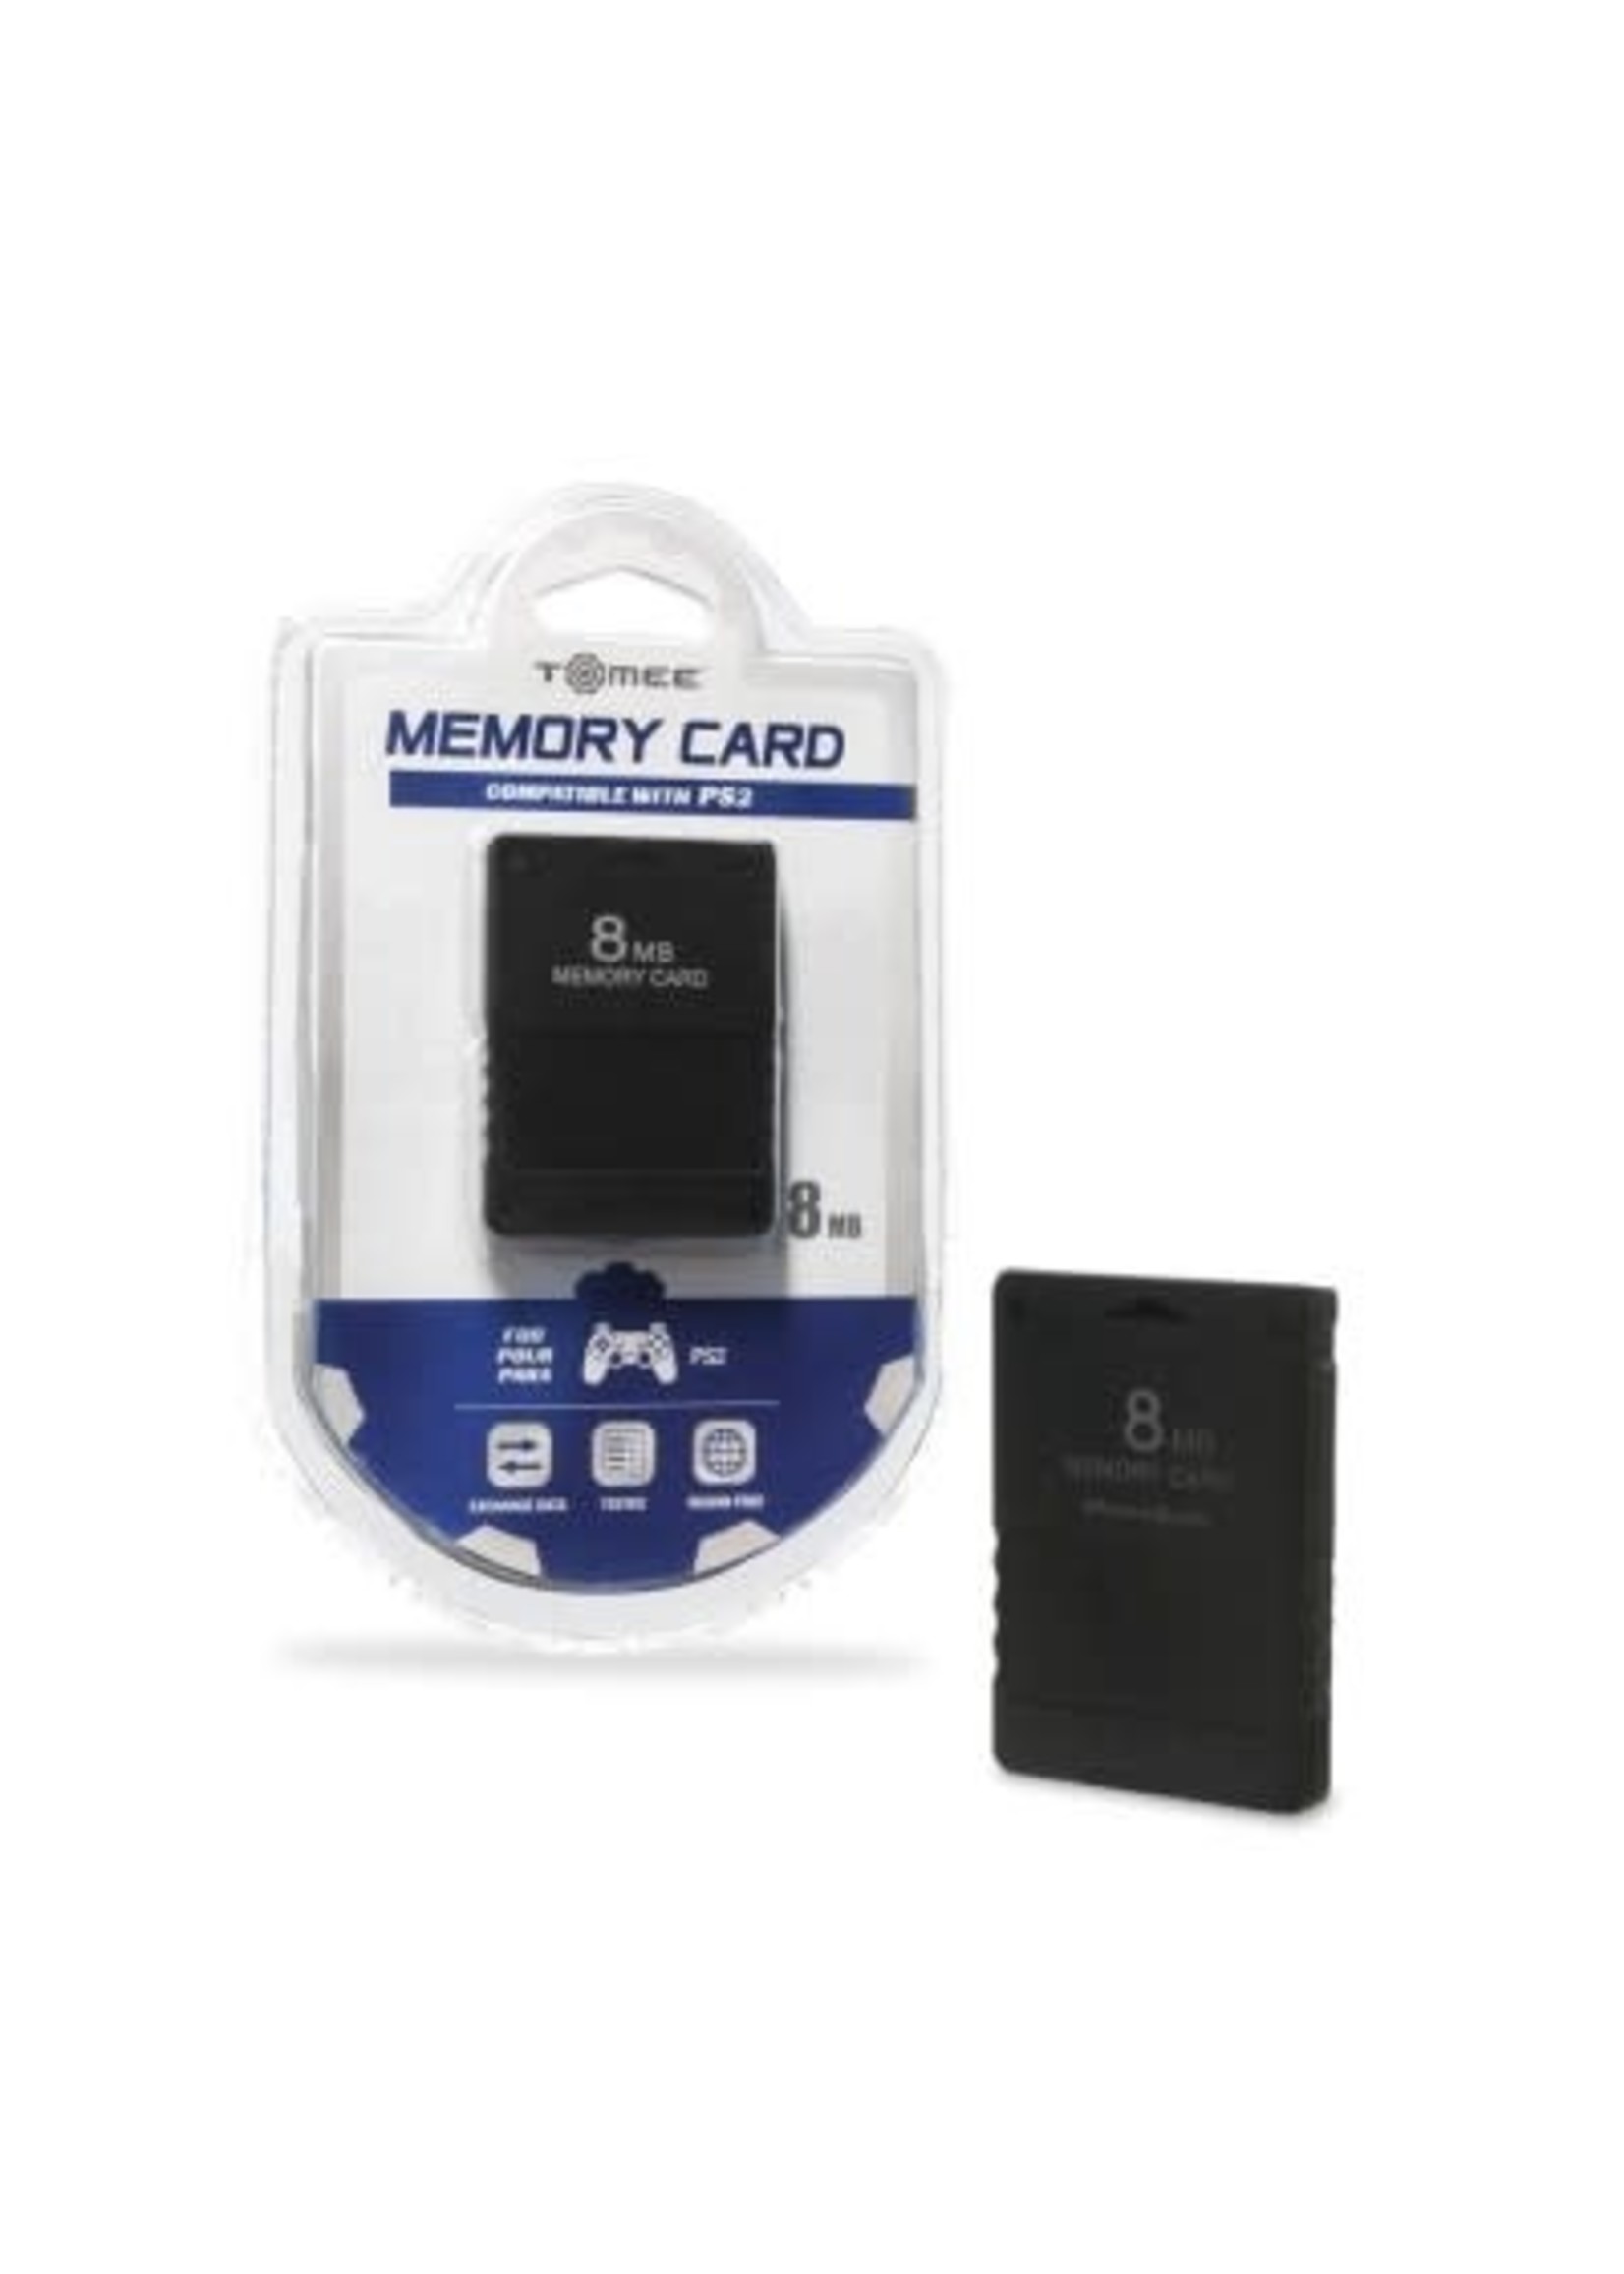 Sony Playstation 2 (PS2) PS2 8 MB Memory Card (Tomee)